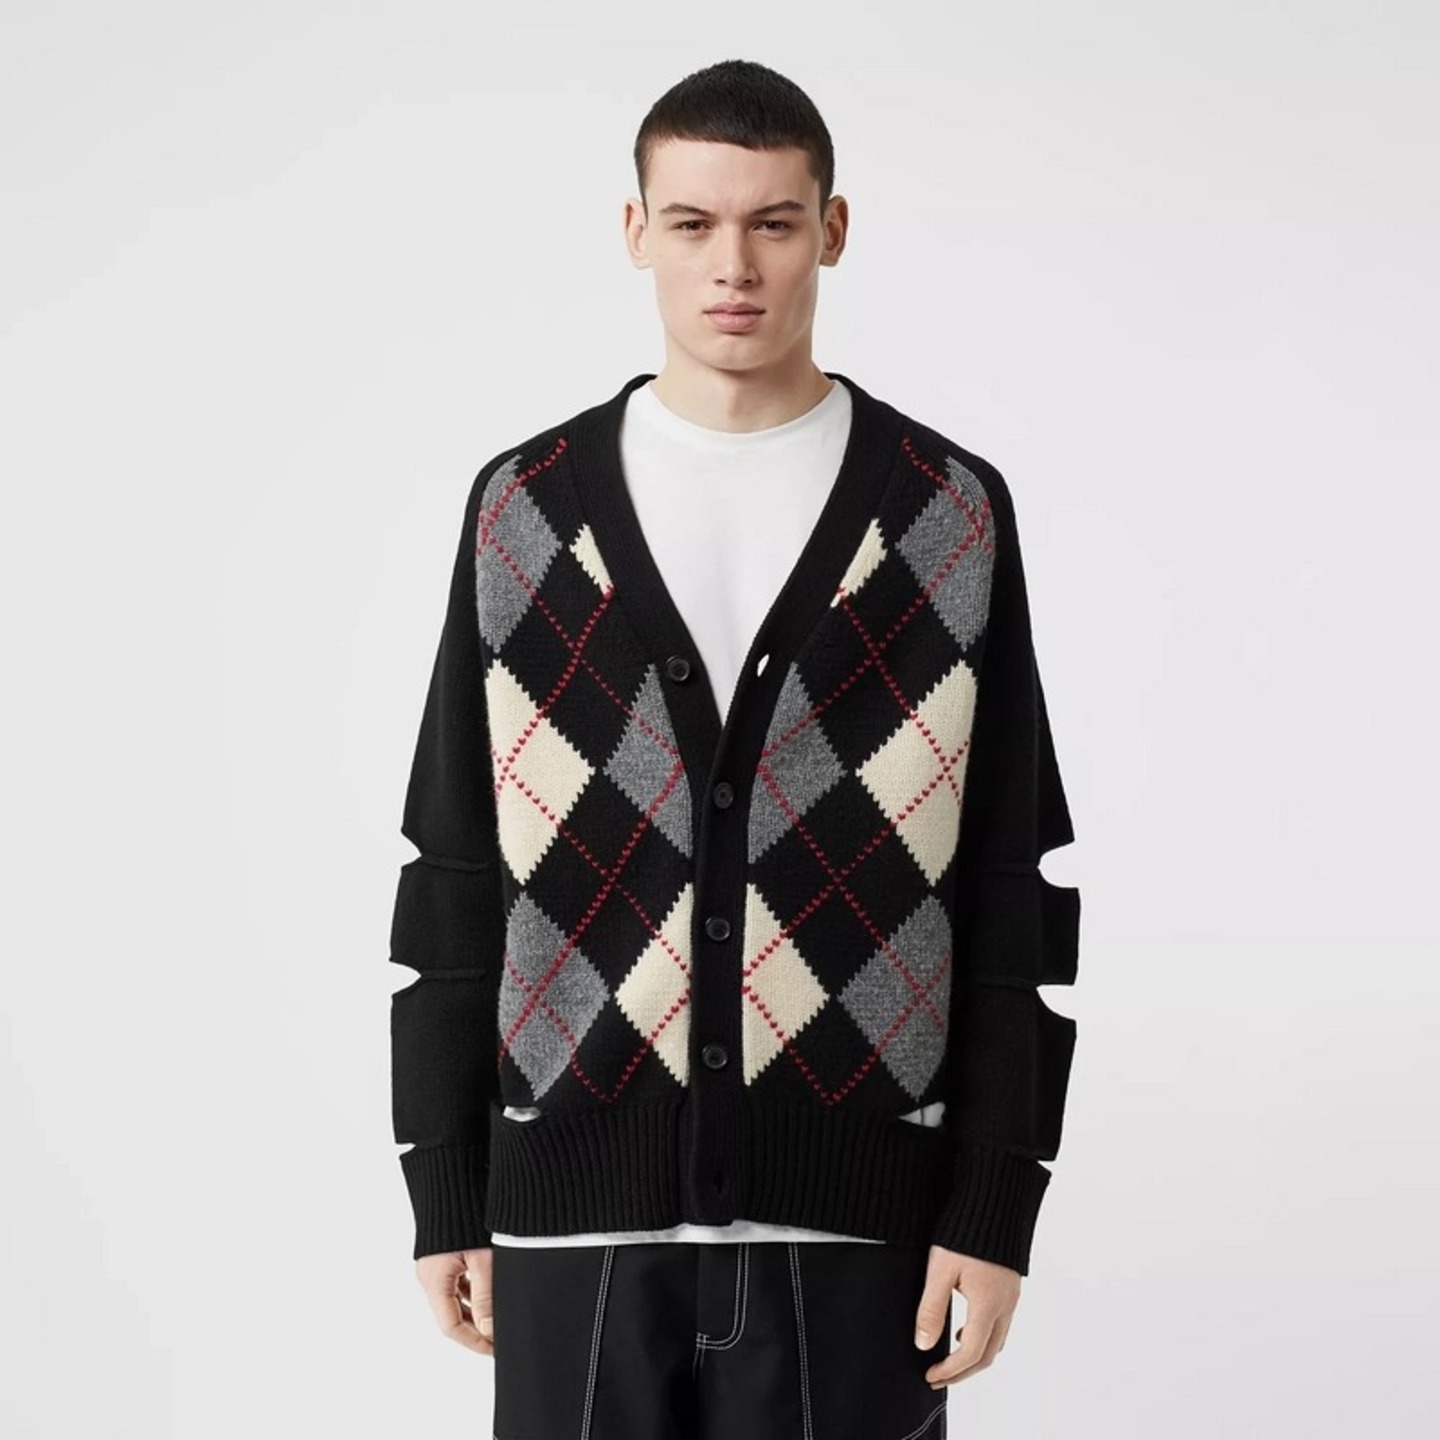 Burberry Cut out Detail Merino Wool Cashmere Cardigan Sweater